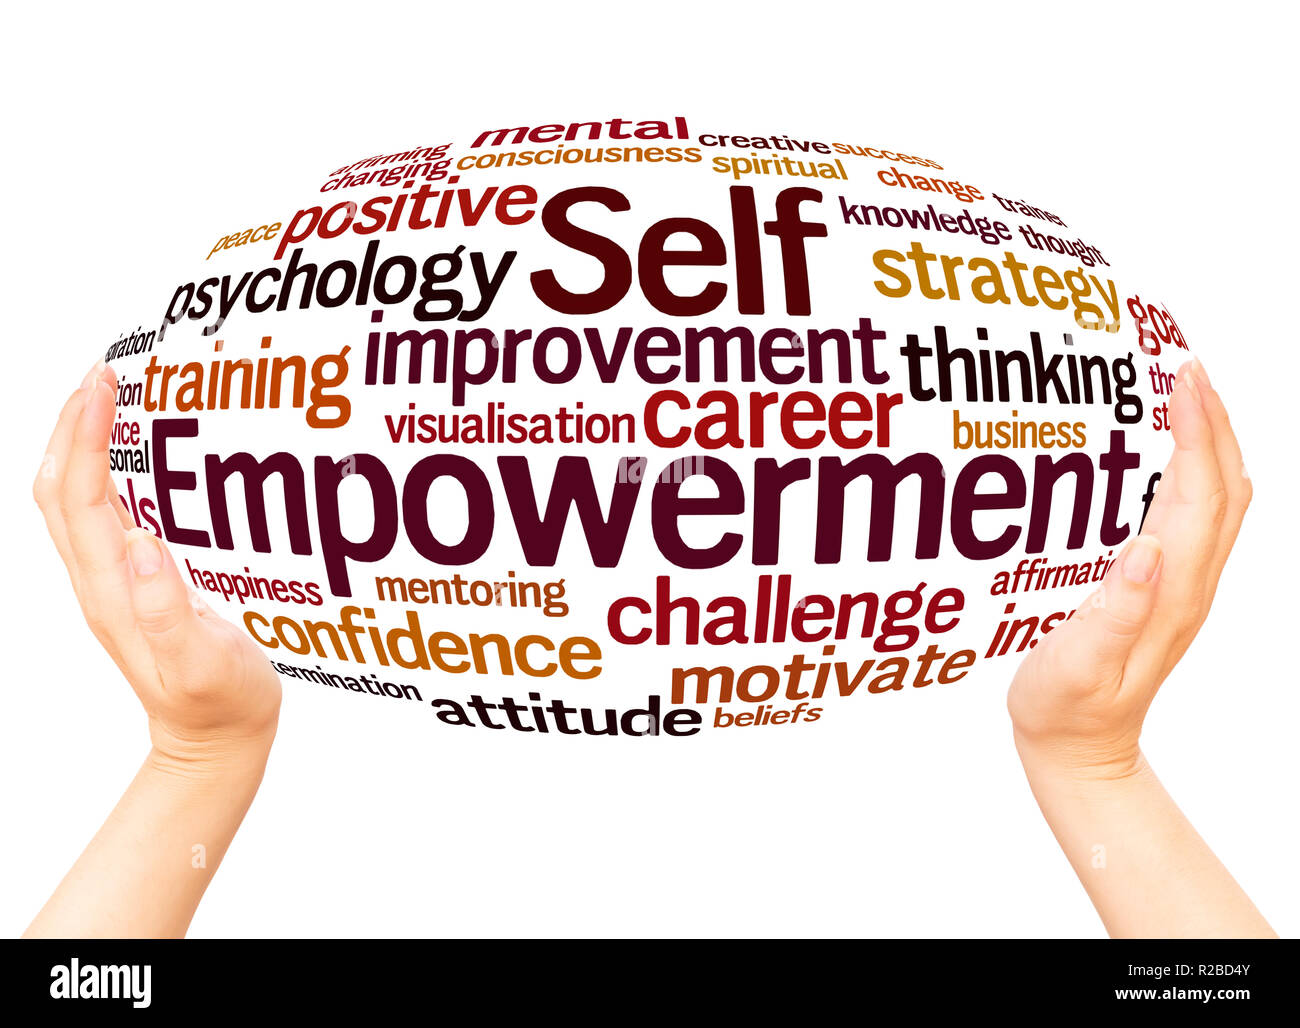 How to Build Self Empowerment in Business